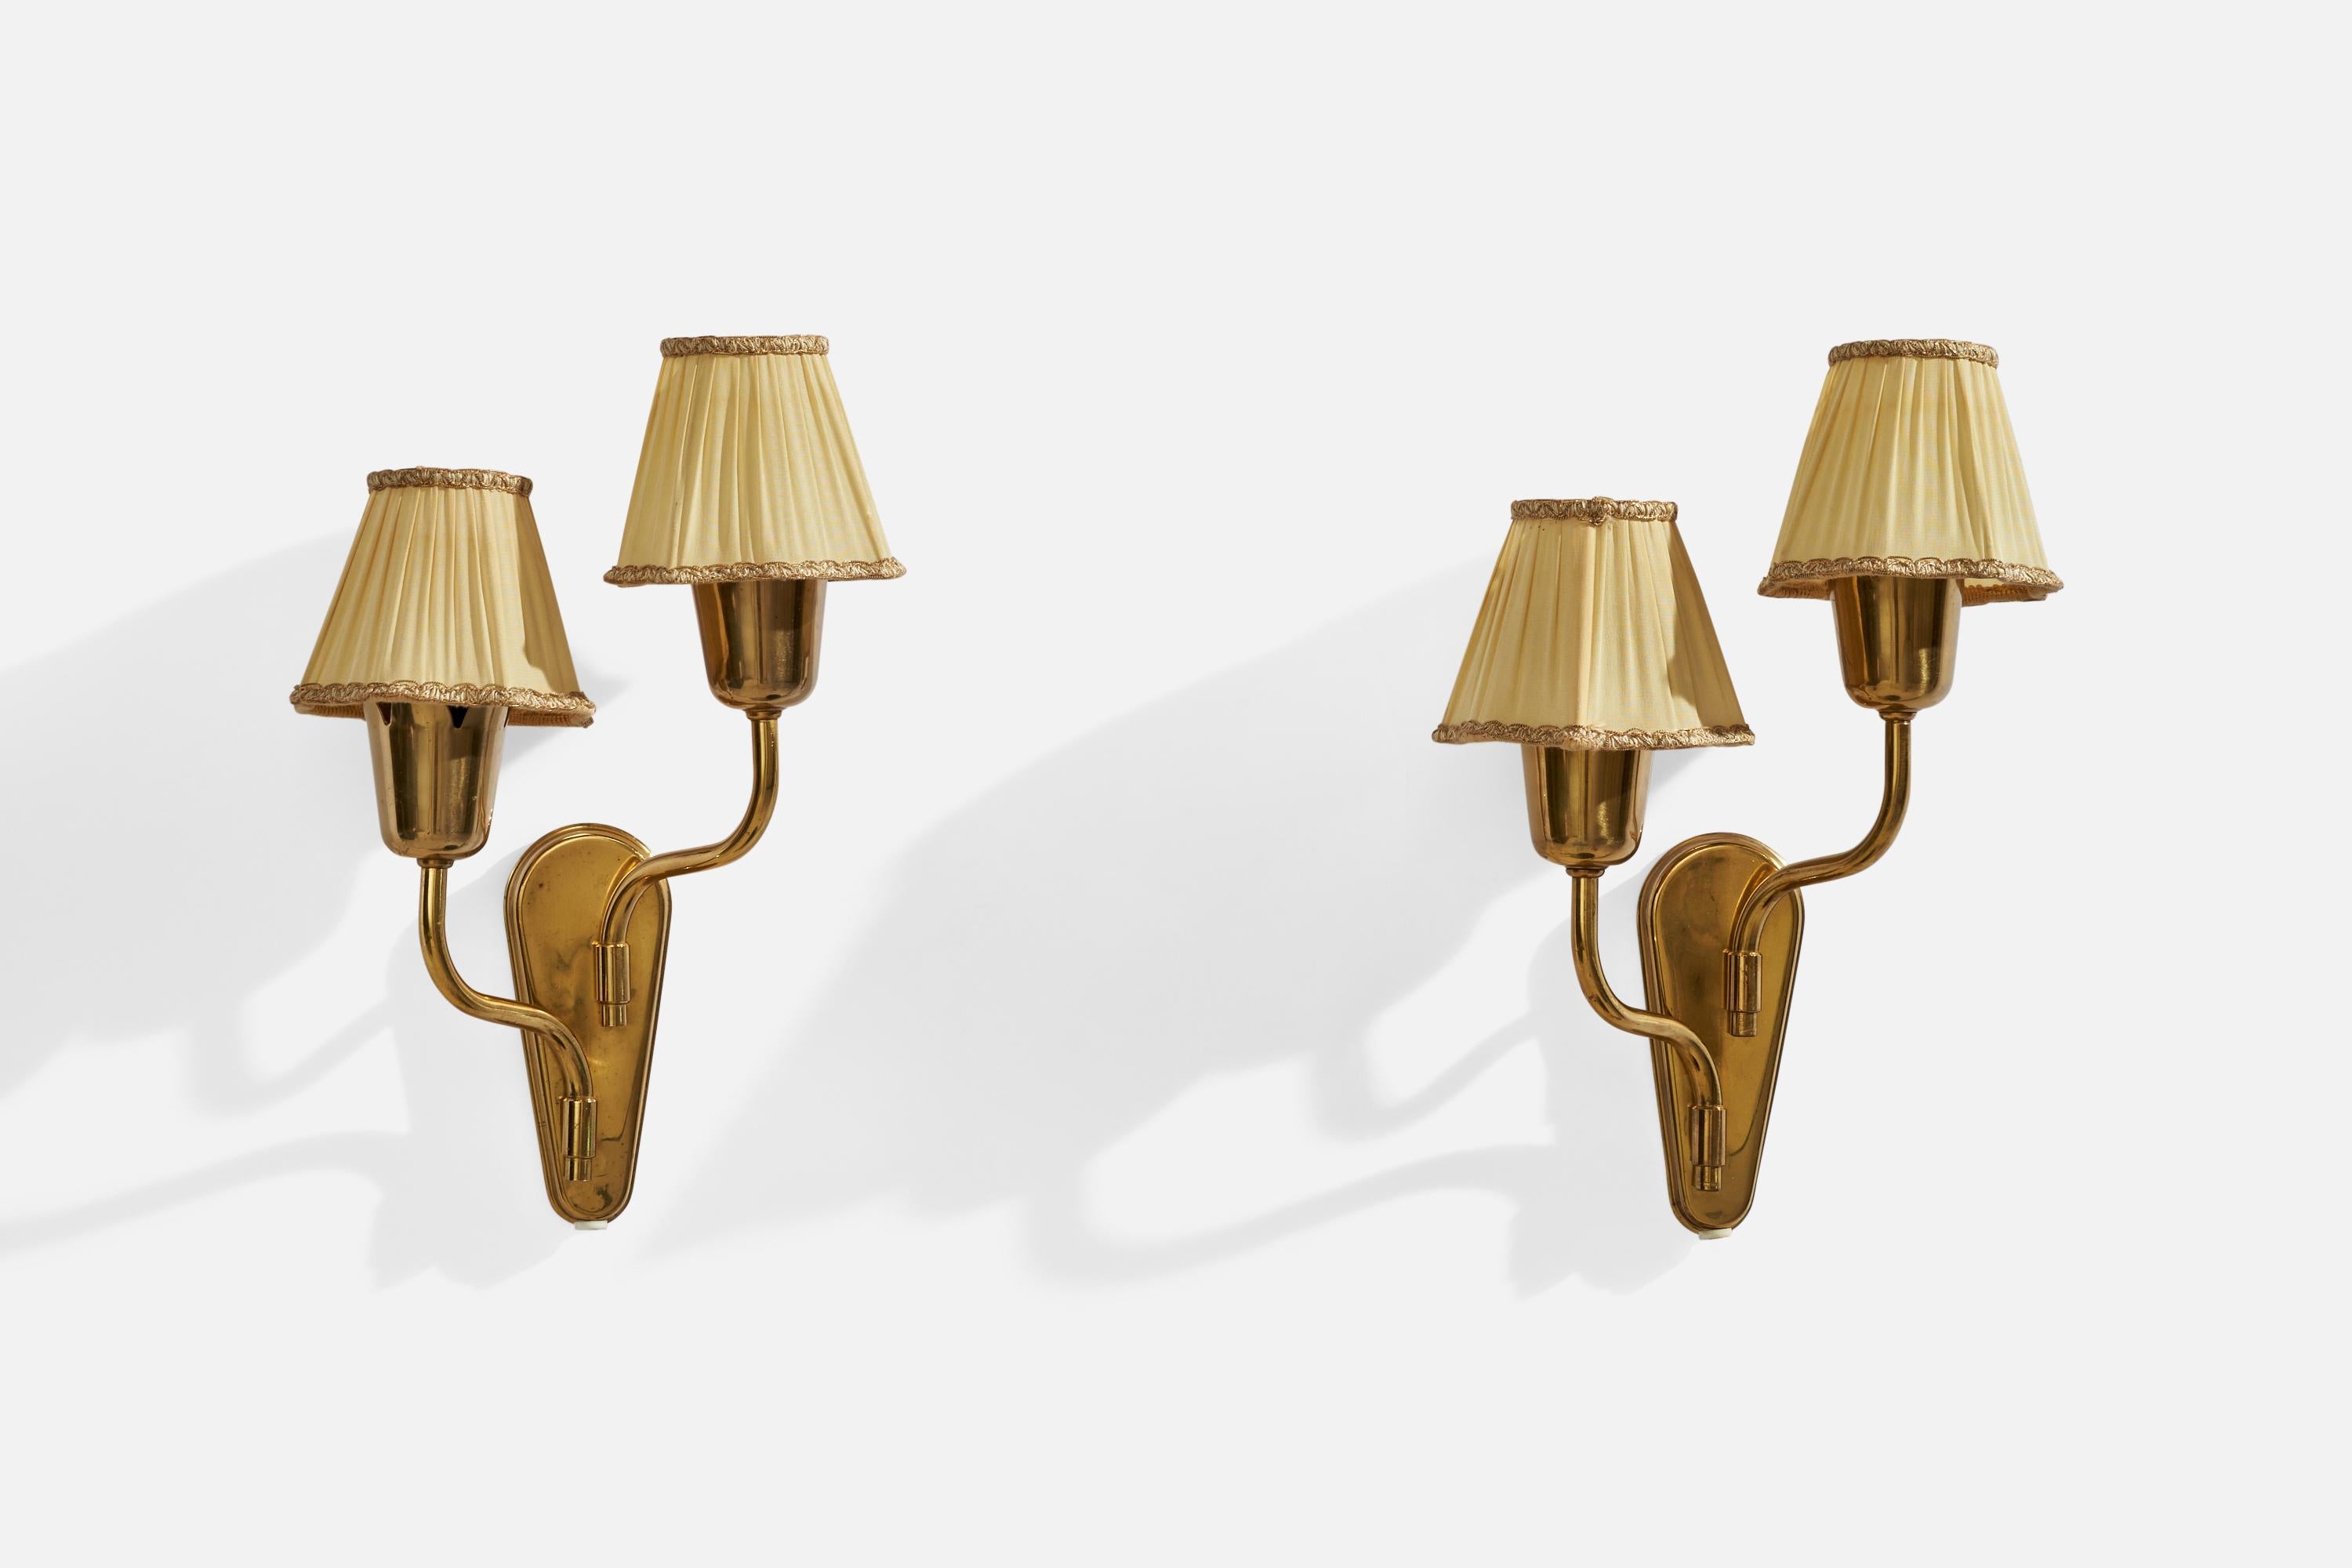 A pair of brass and beige fabric wall lights, designed and produced by Fog & Mørup, Denmark, c. 1940s.

Overall Dimensions (inches): 13.5”  H x 9” W x 5.25” D
Back Plate Dimensions (inches): 6”  H x 2.25”  W x .75” D
Bulb Specifications: E-14